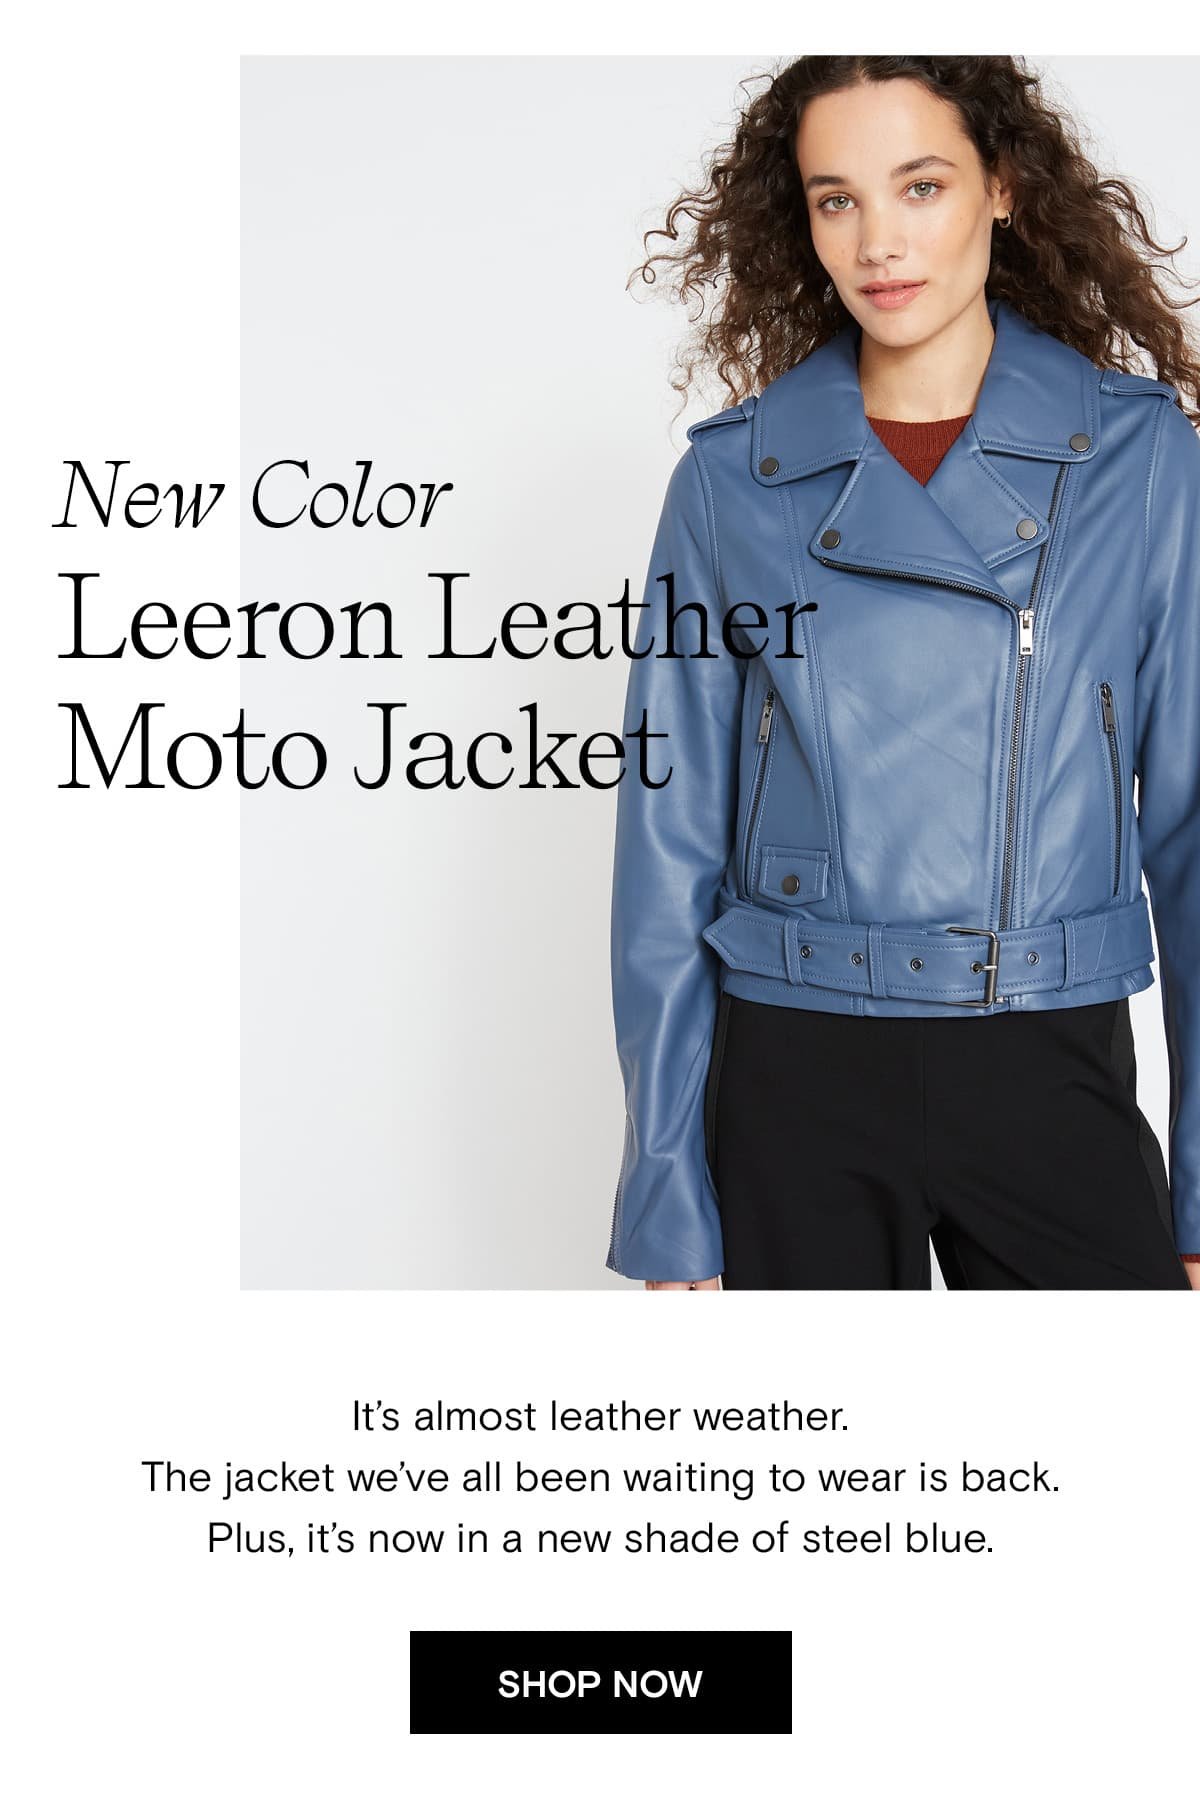 It's almost leather weather. The jacket we've all been waiting to wear is back. Plus, it's now in a new shade of steel blue.